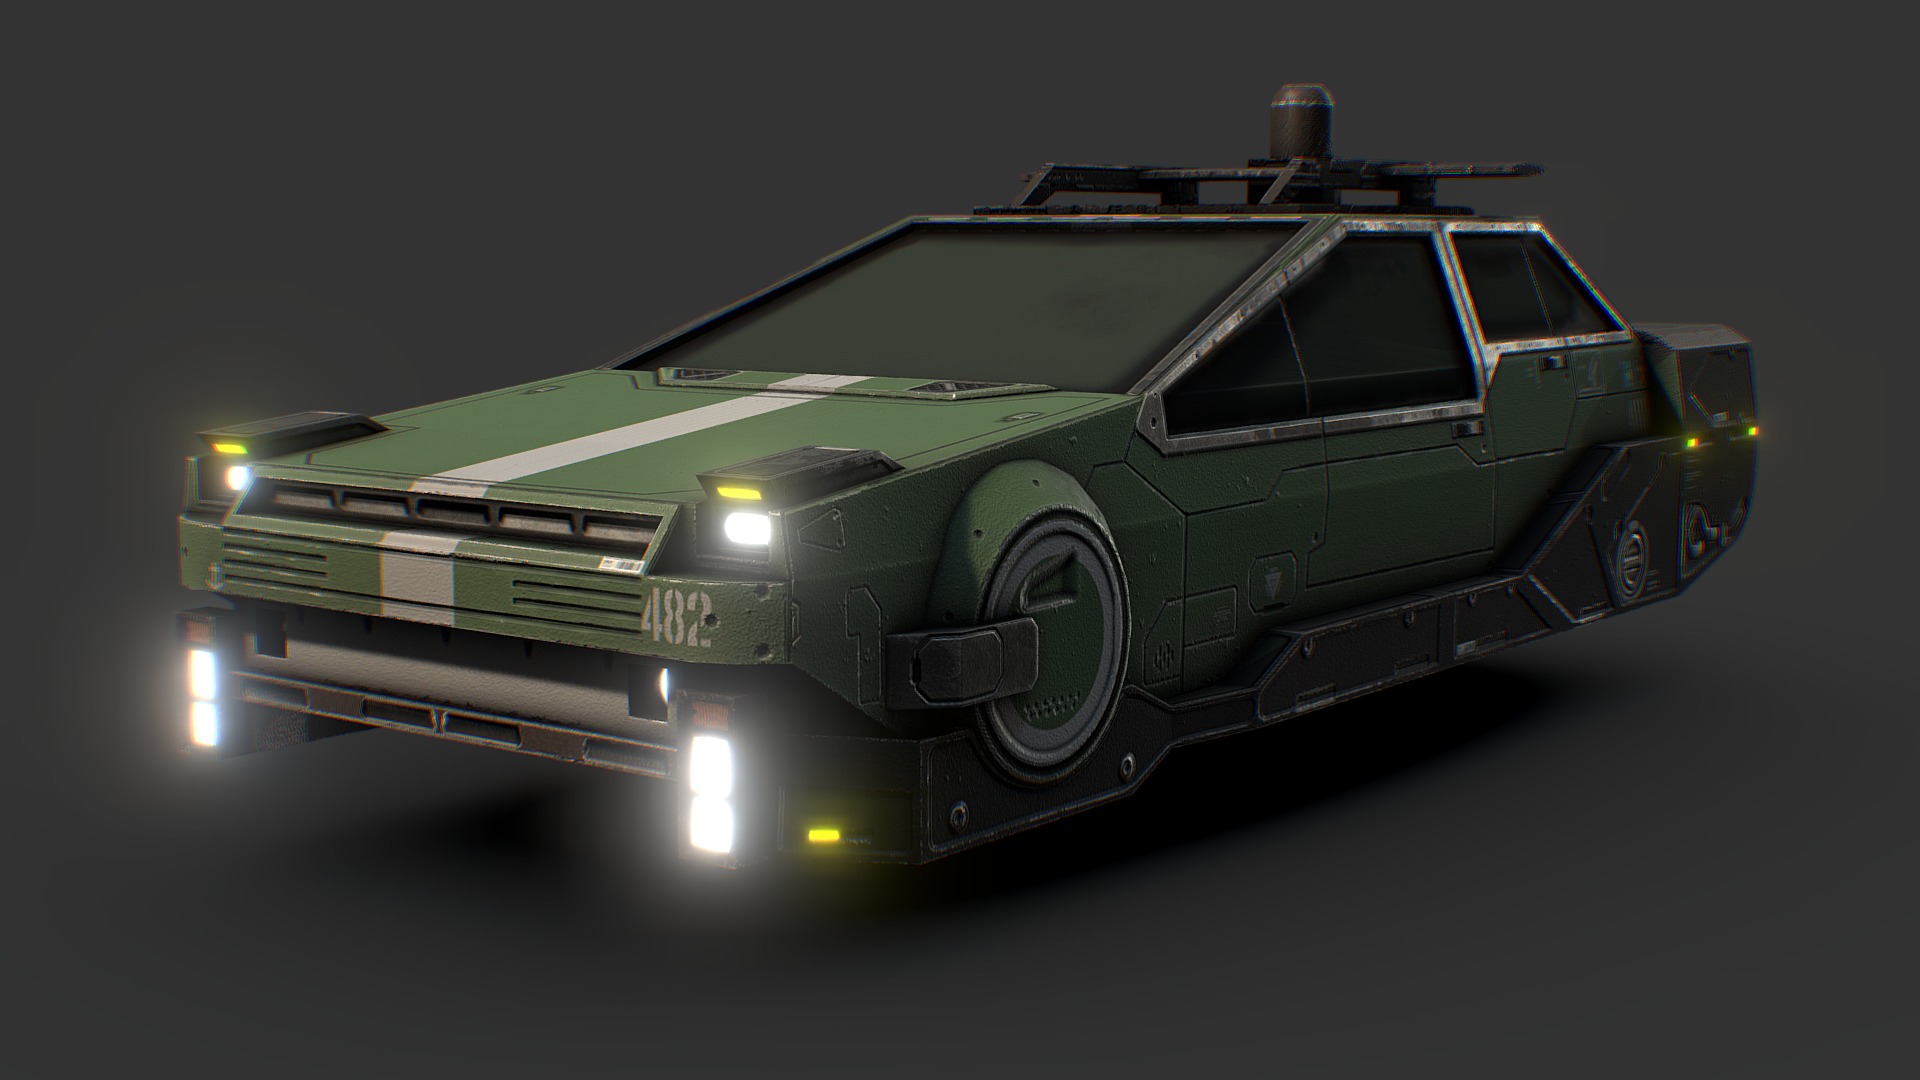 3D model Cyberpunk Hovercar - This is a 3D model of the Cyberpunk Hovercar. The 3D model is about a green car with lights.